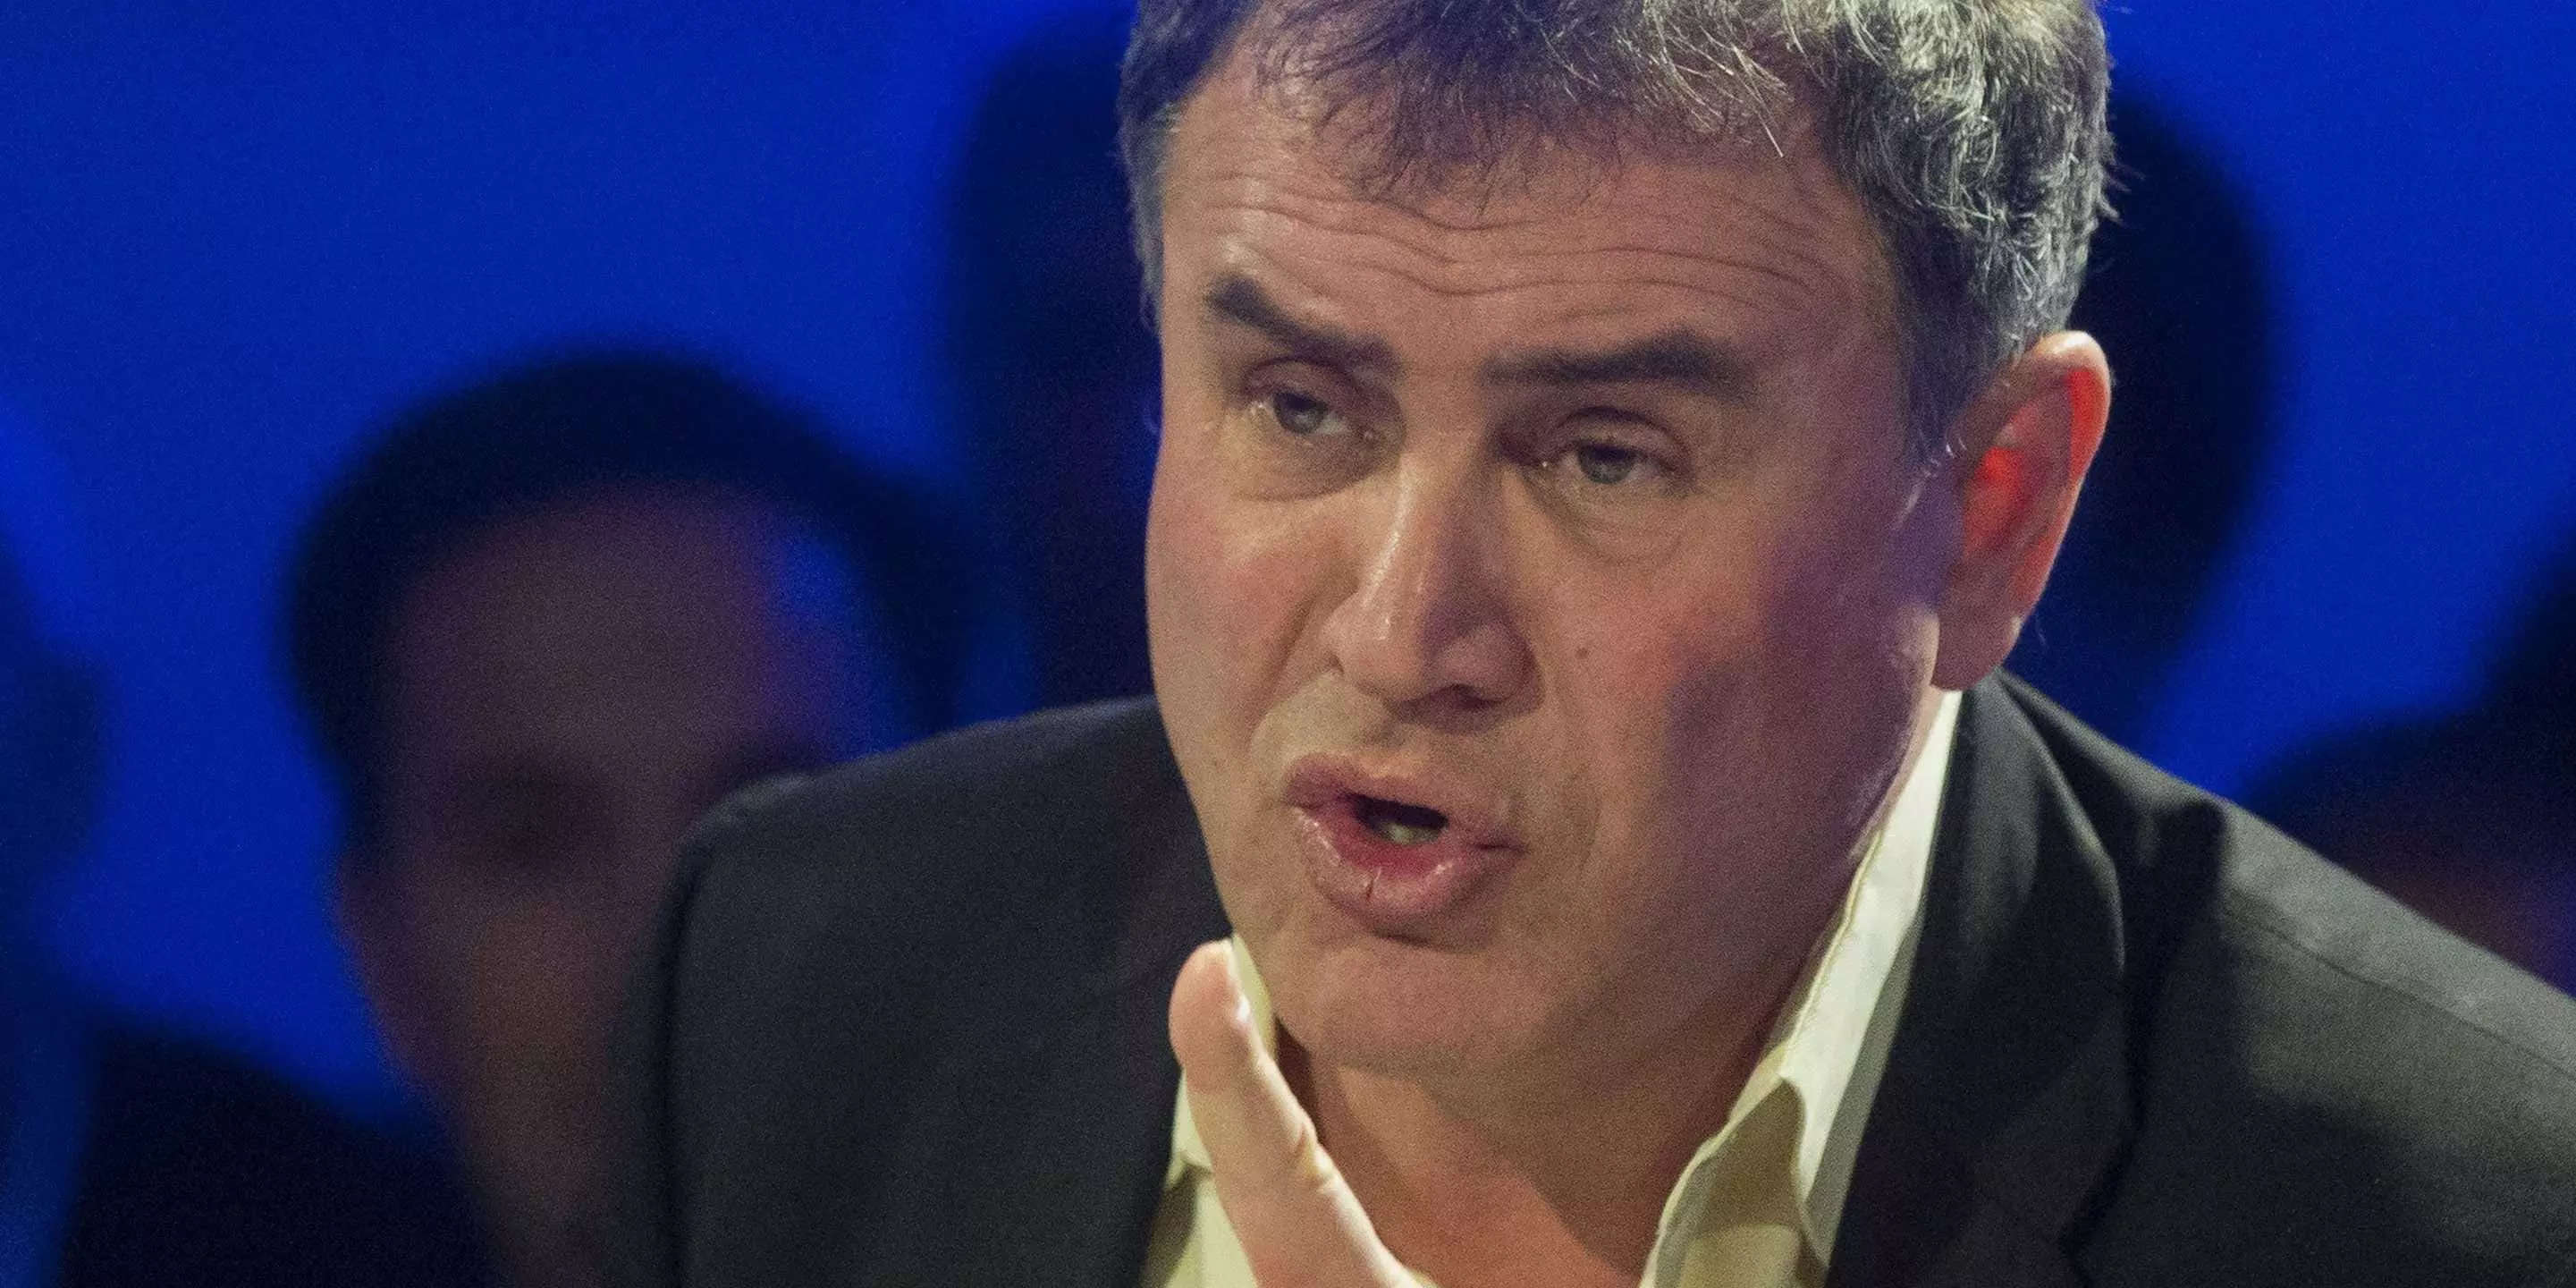 ‘Dr.  Doom’ Nouriel Roubini says the debt crisis is already here and the base case scenario is now a hard landing before the end of the year